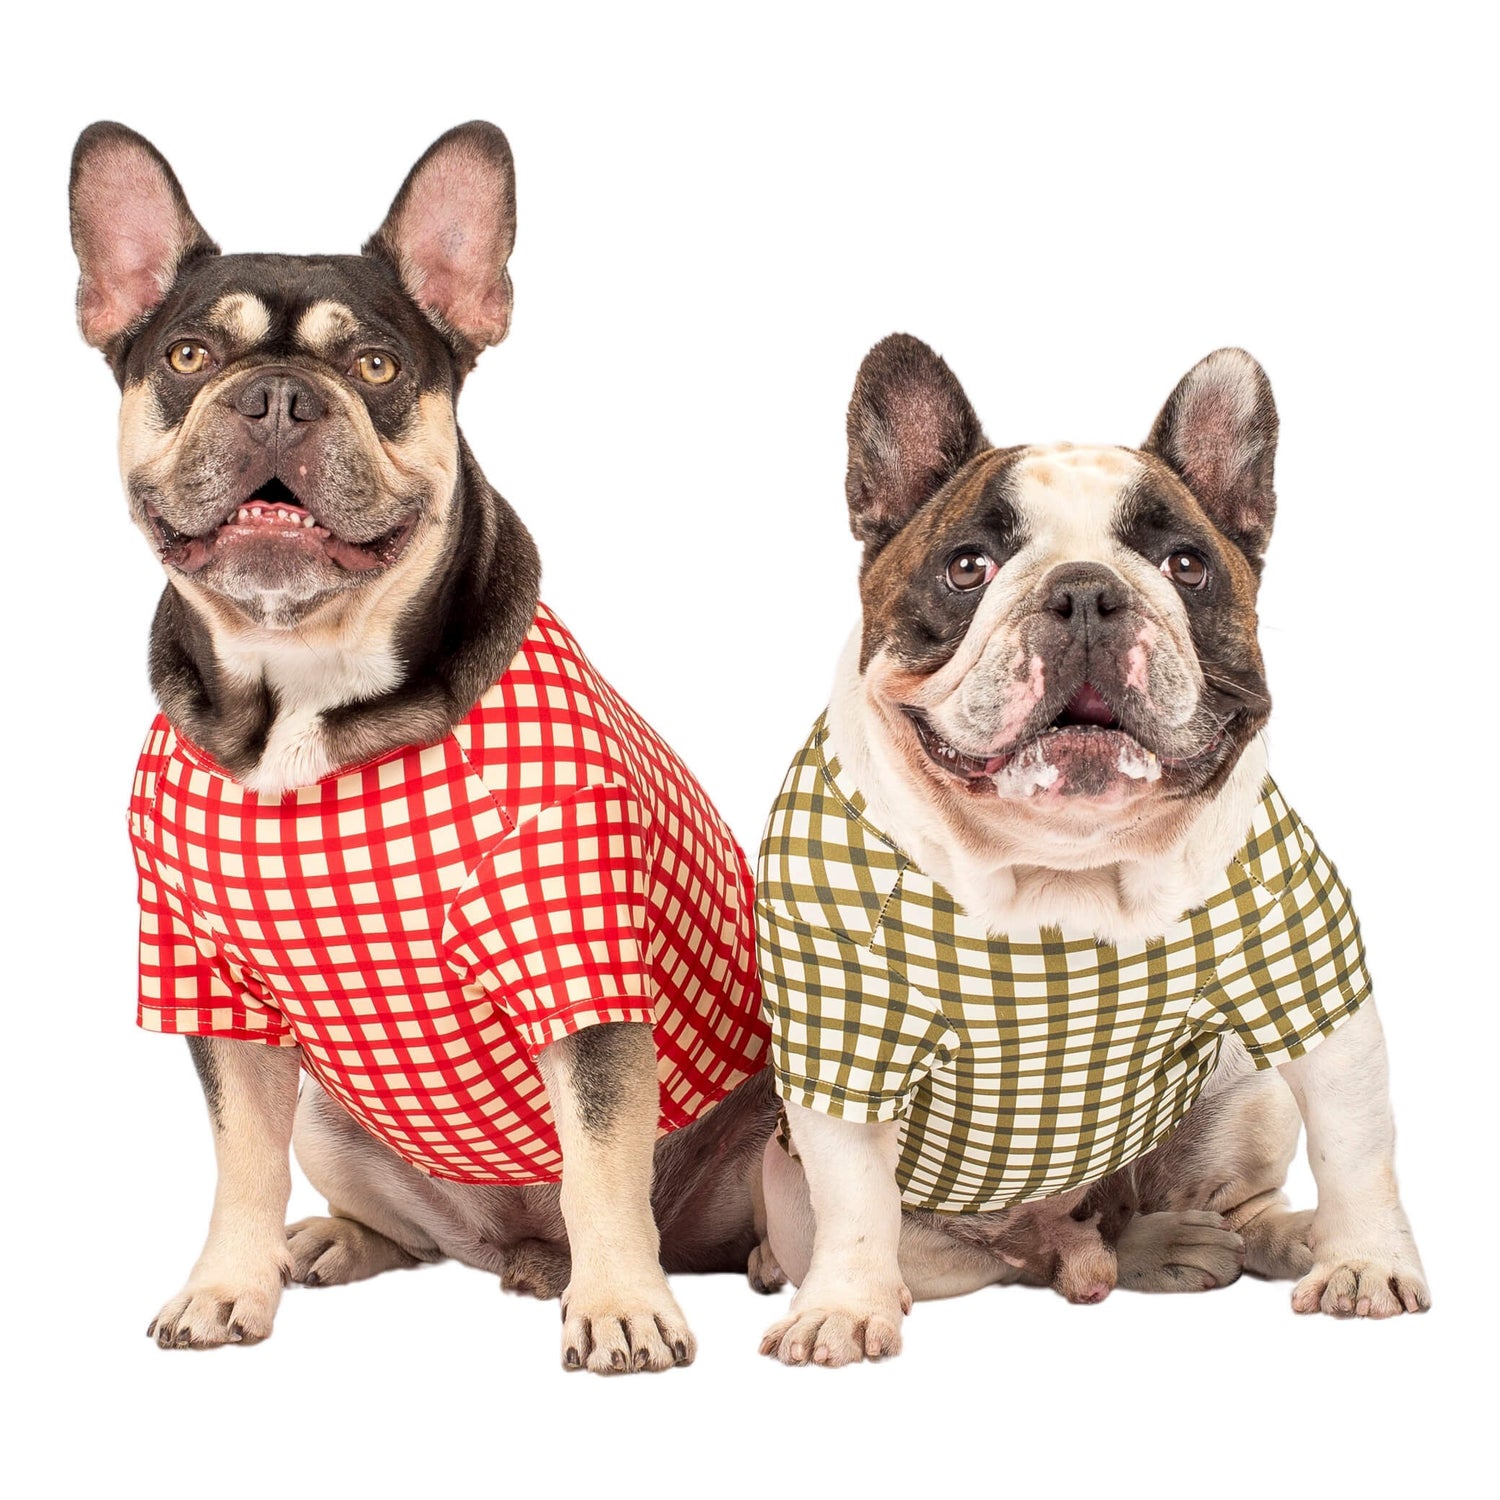 A Chocolate Tan French Bulldog wearing a Red Gingham Rash shirt and a Brindle Pied French Bulldog wearing a Green Gingham Rash shirt.